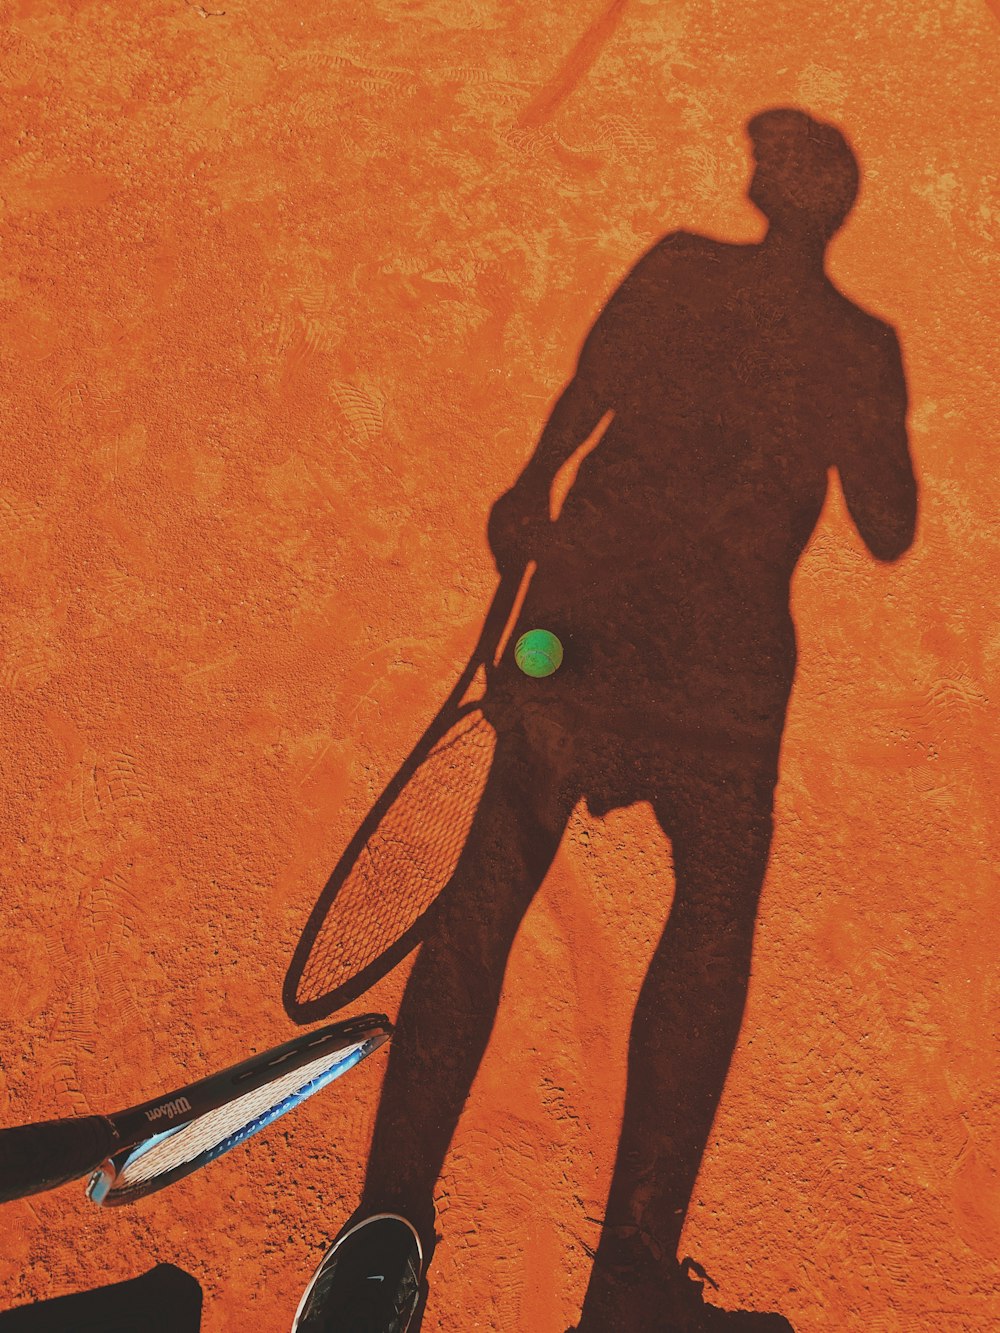 a shadow of a man holding a tennis racket